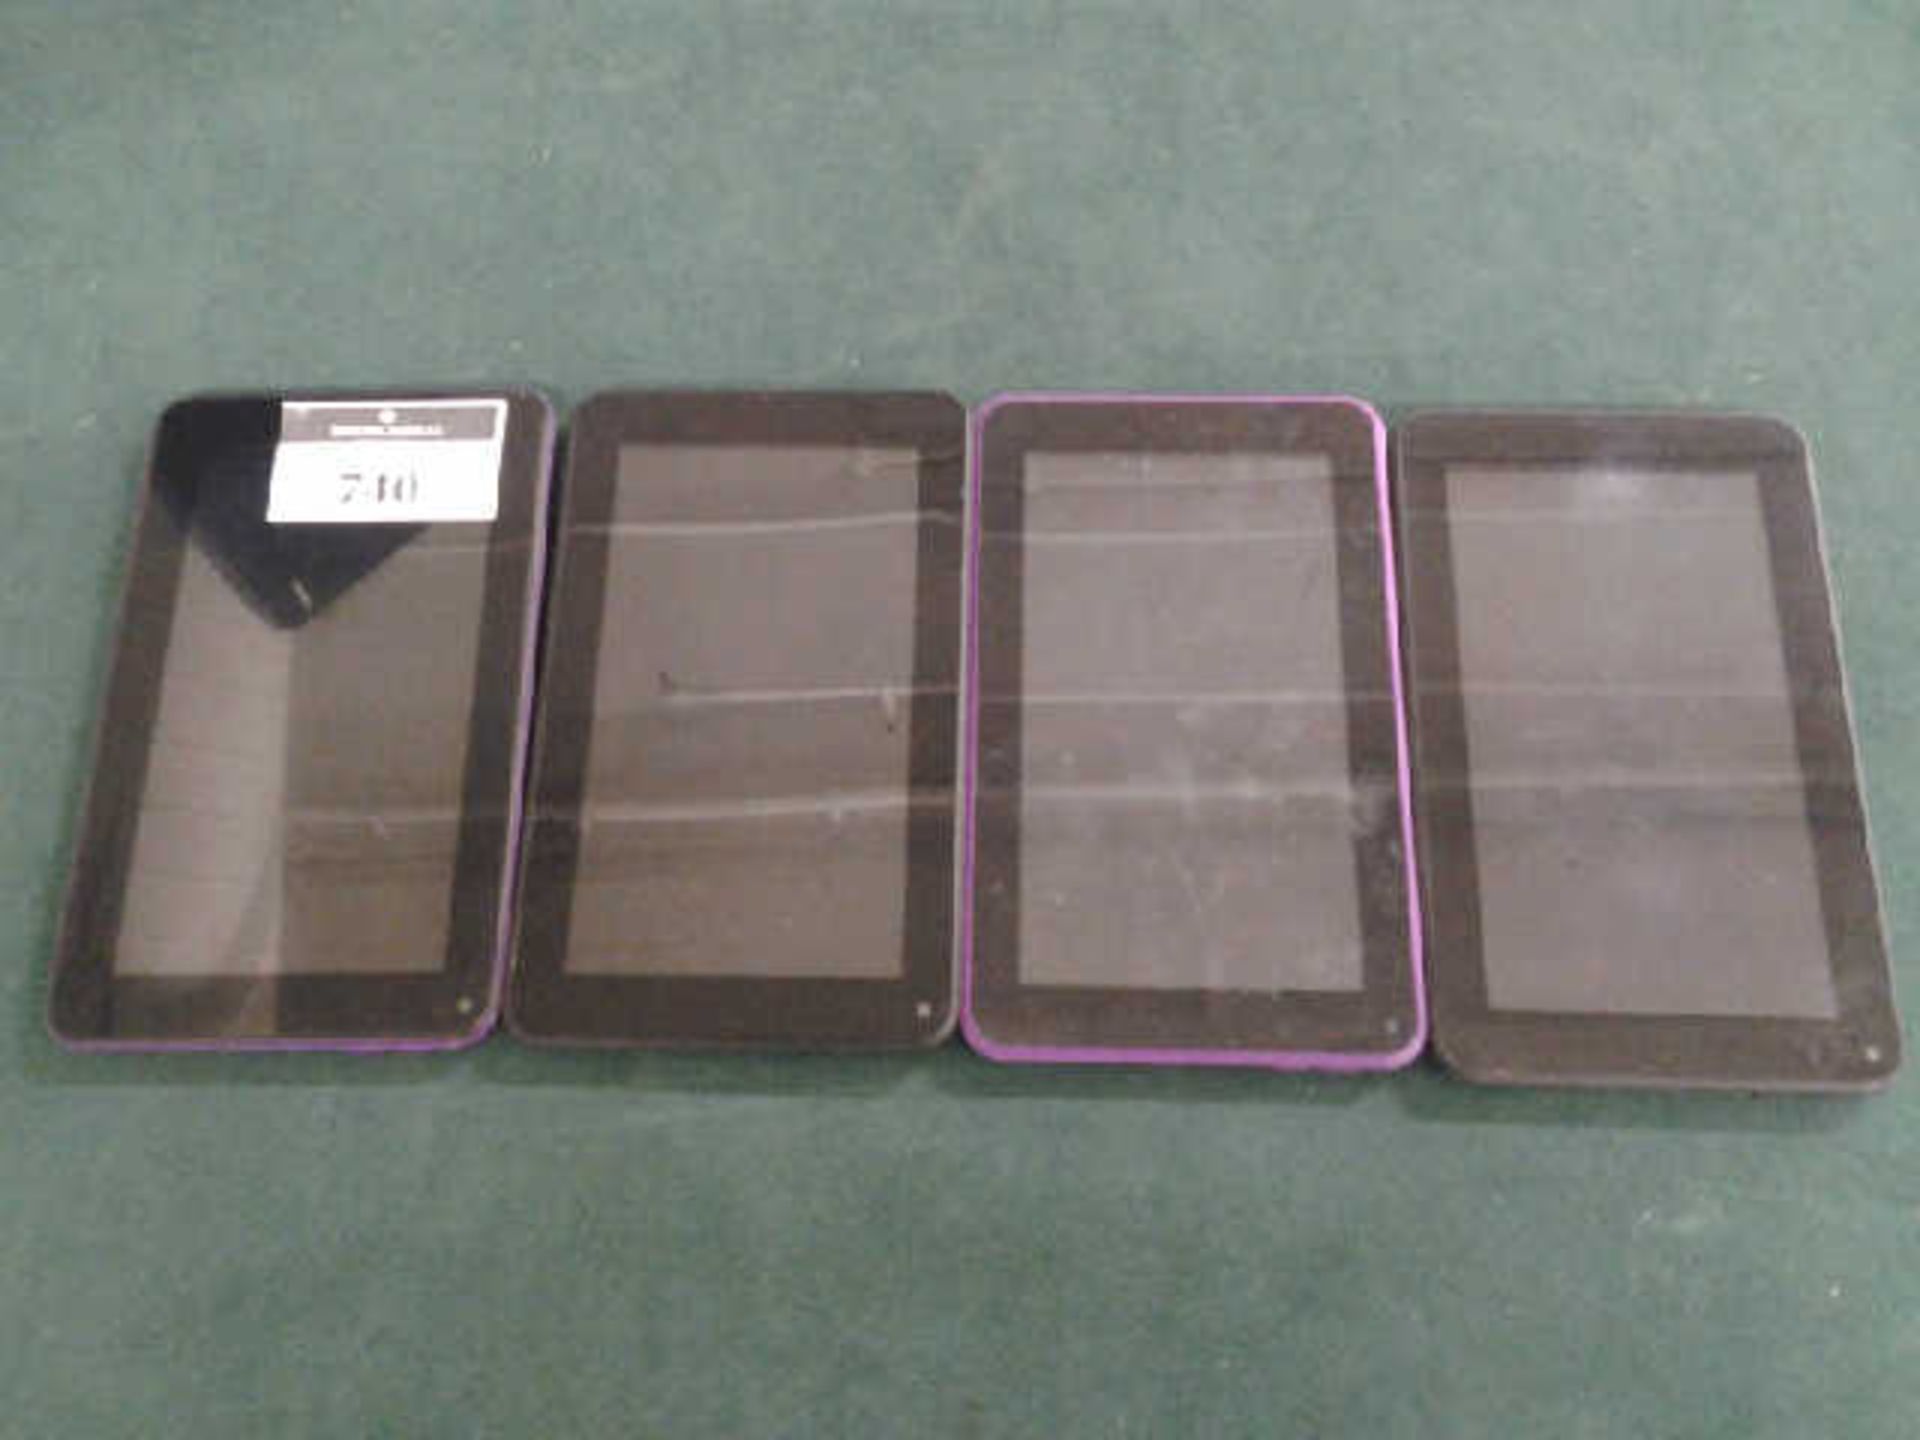 4 UNBOXED MIKONA 7" 8GB TOUCH-SCREEN ANDROID TABLETS.